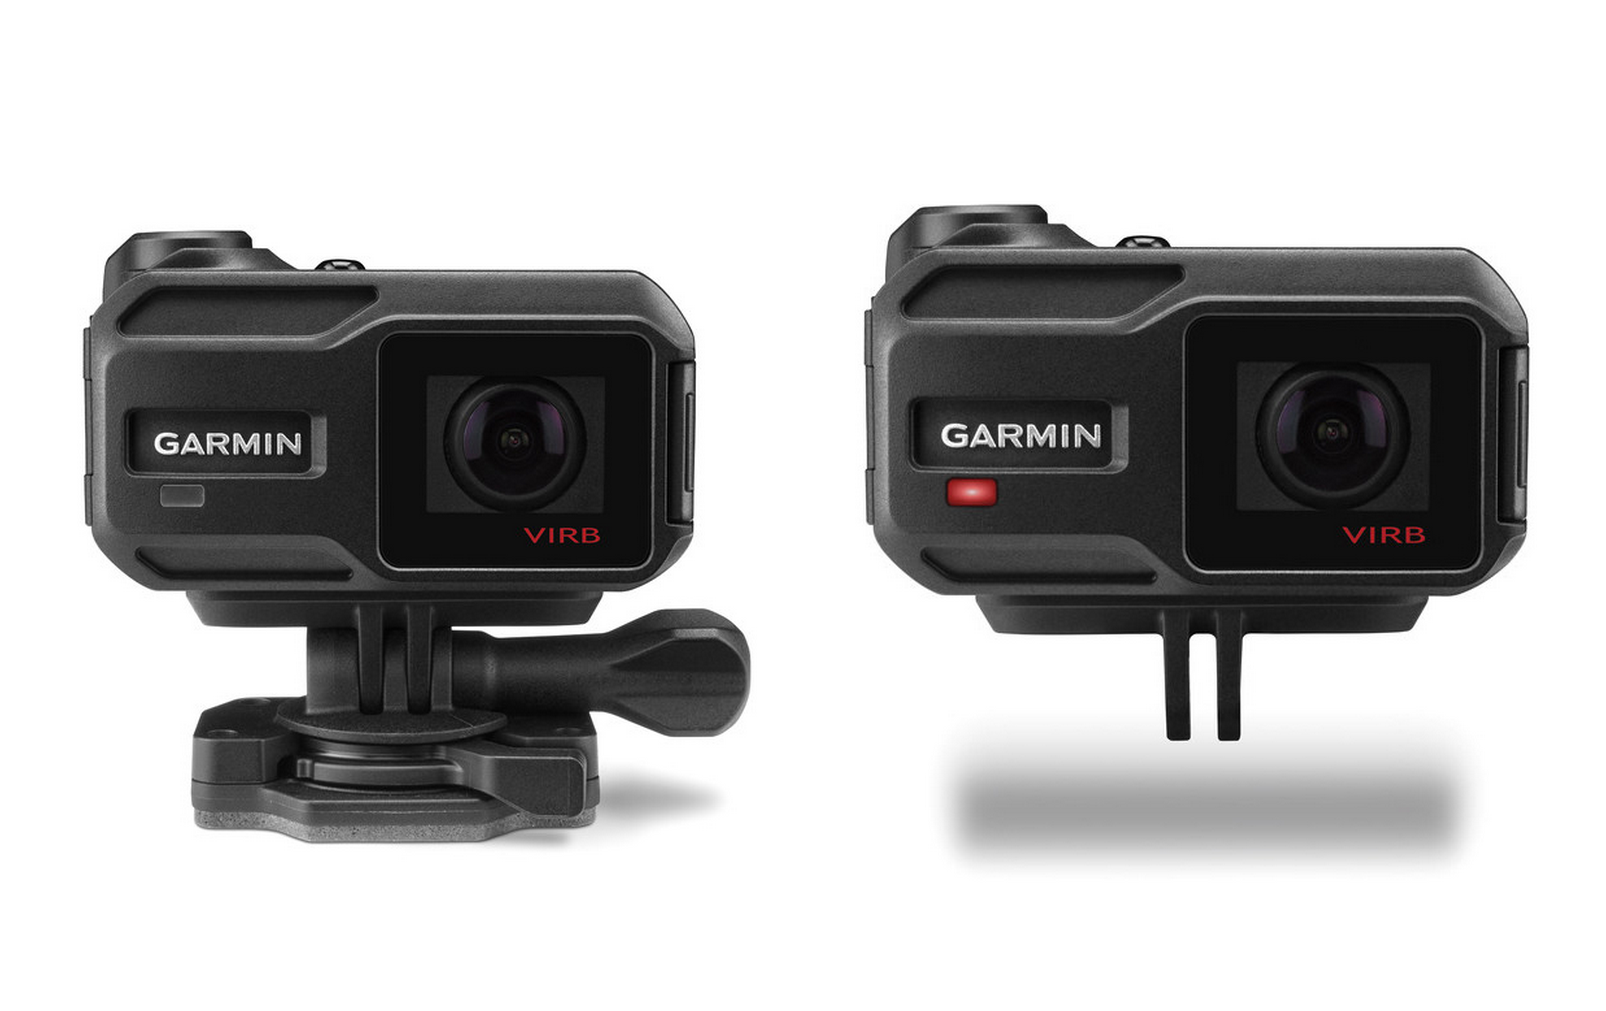 Garmin reveals new VIRB X and XE action cameras